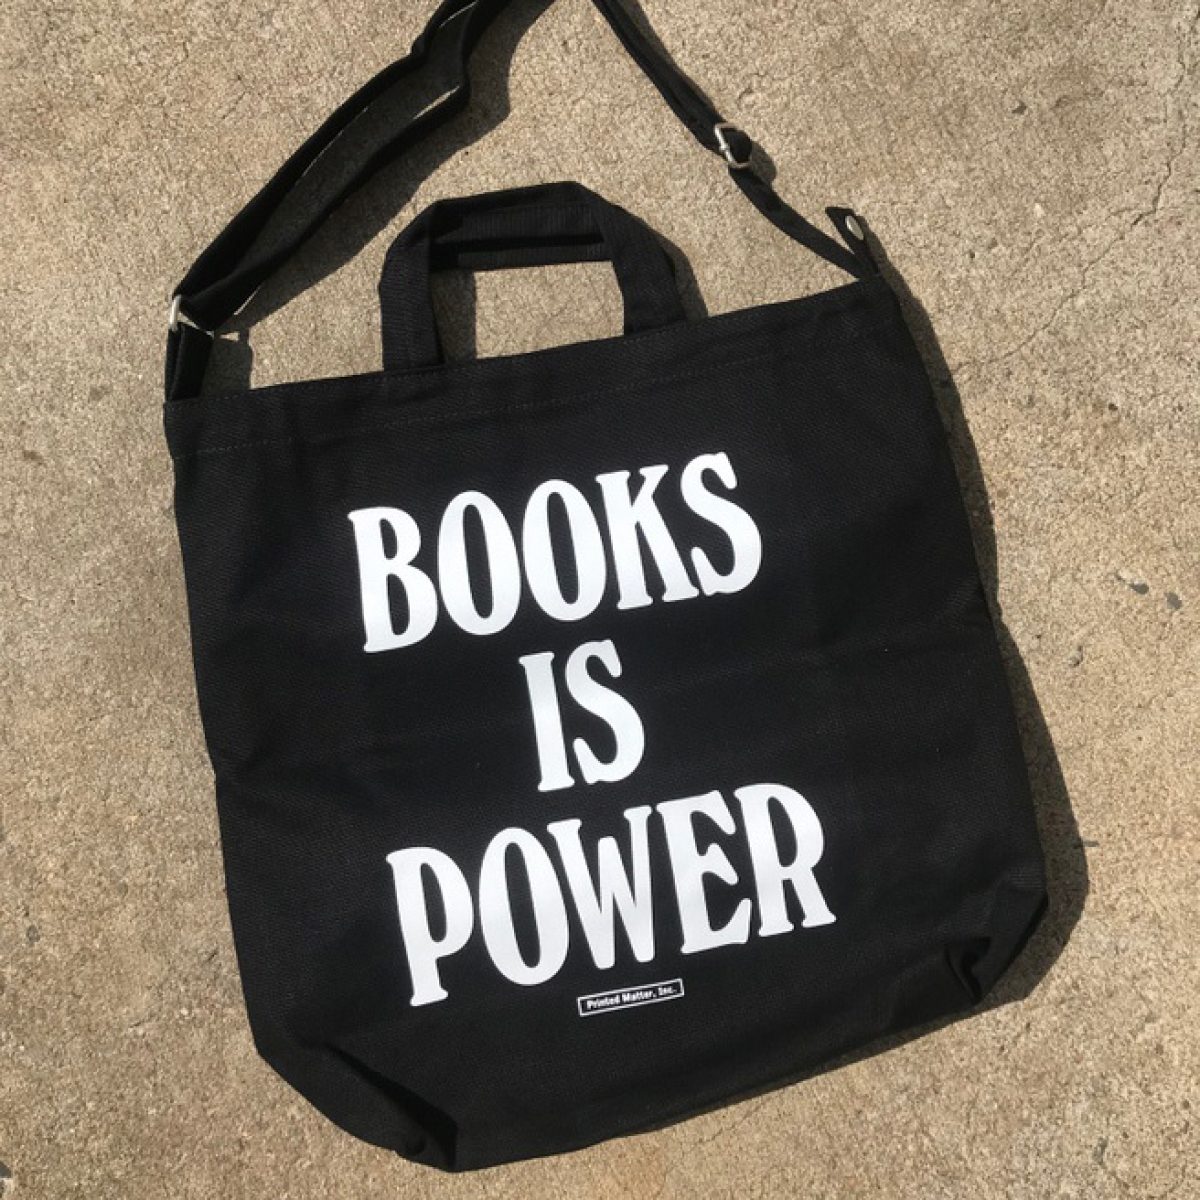 When someone wants a sturdy tote that can hold their laptop, books